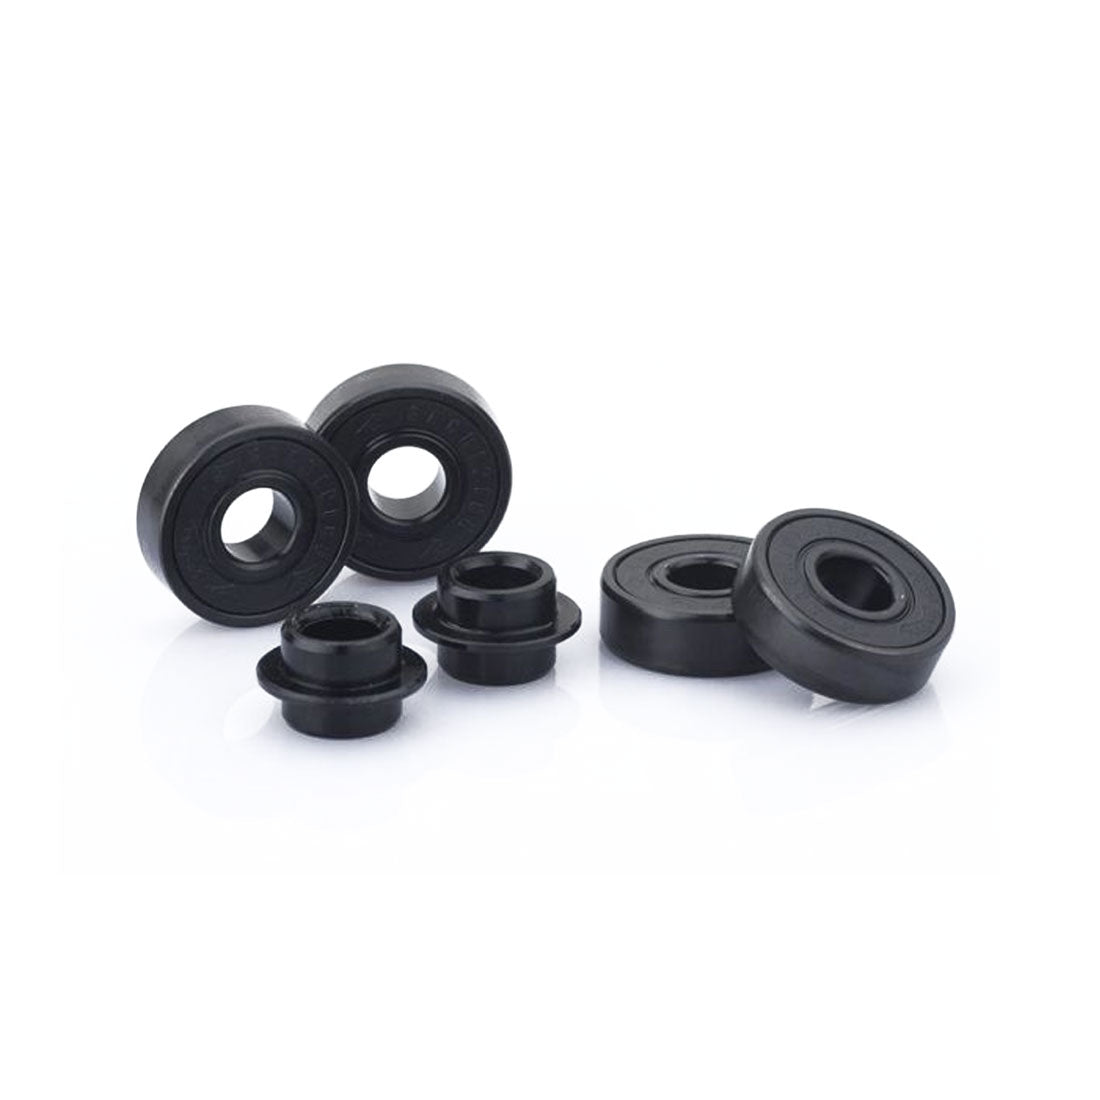 Sacrifice Roller Coasters Abec 9 Bearings - Black Scooter Hardware and Parts